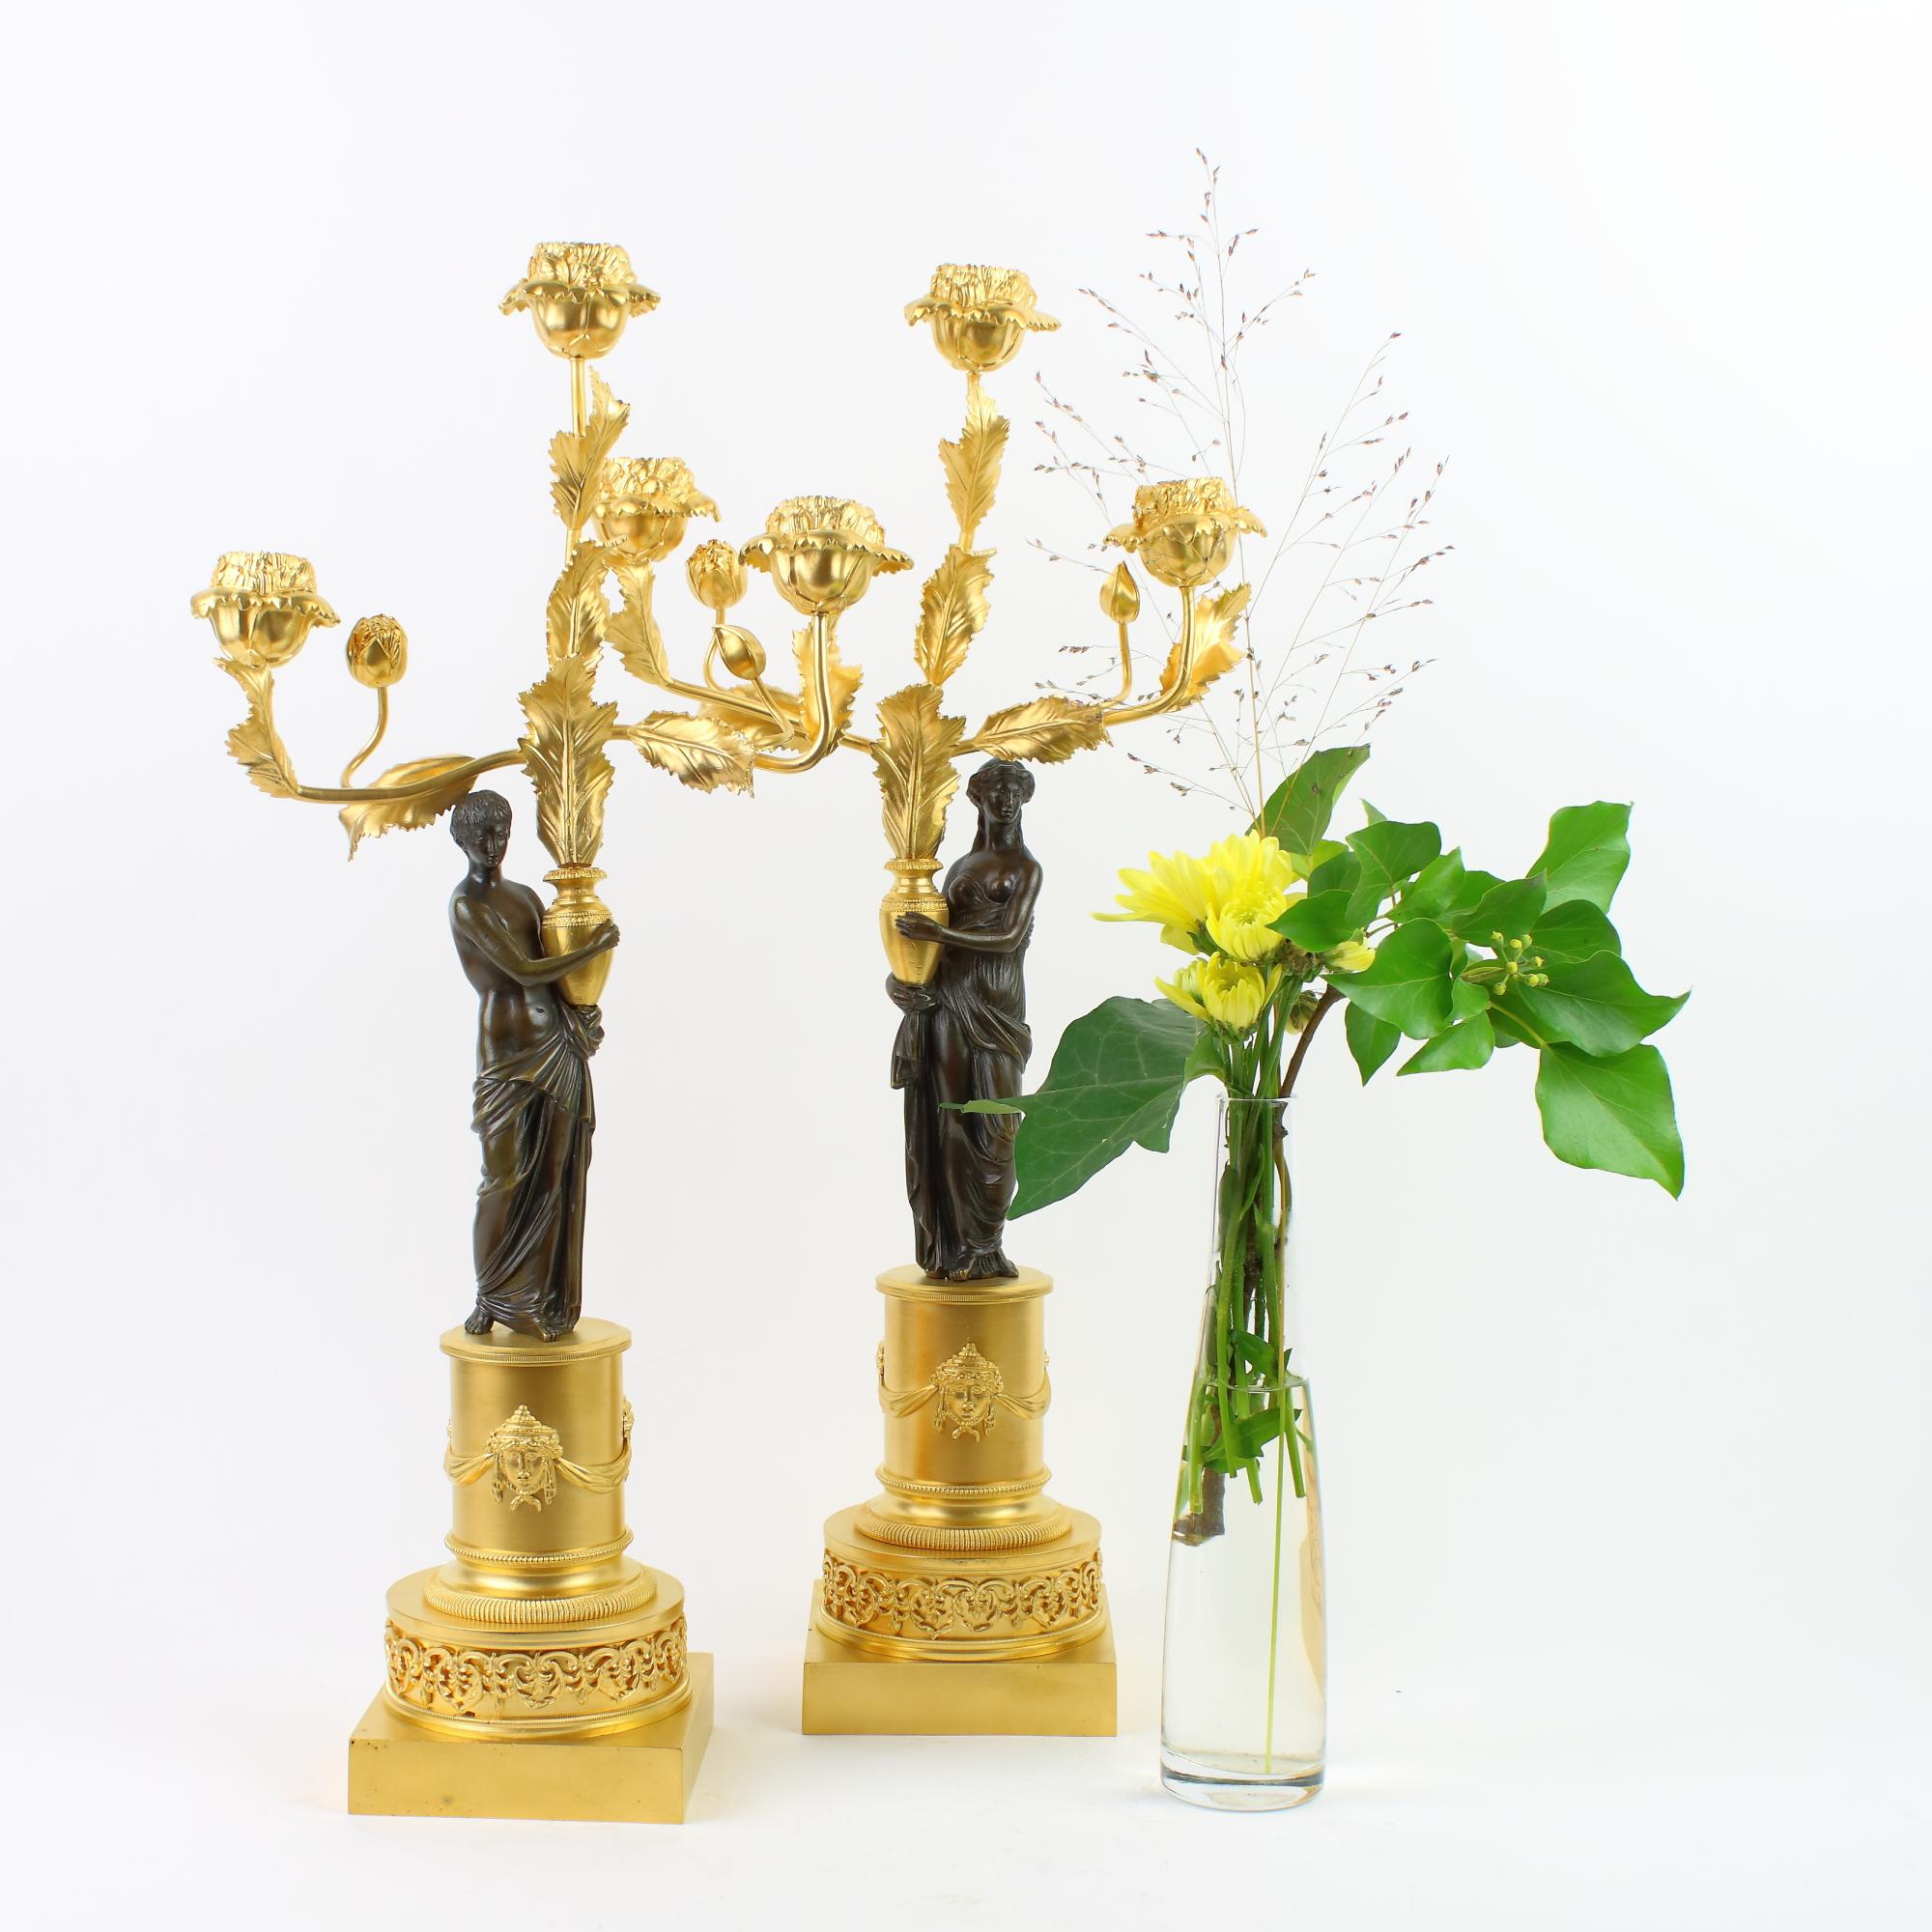 18th/19th Century Pair of Russian Figural Gilt and Patinated Bronze Candelabra For Sale 8